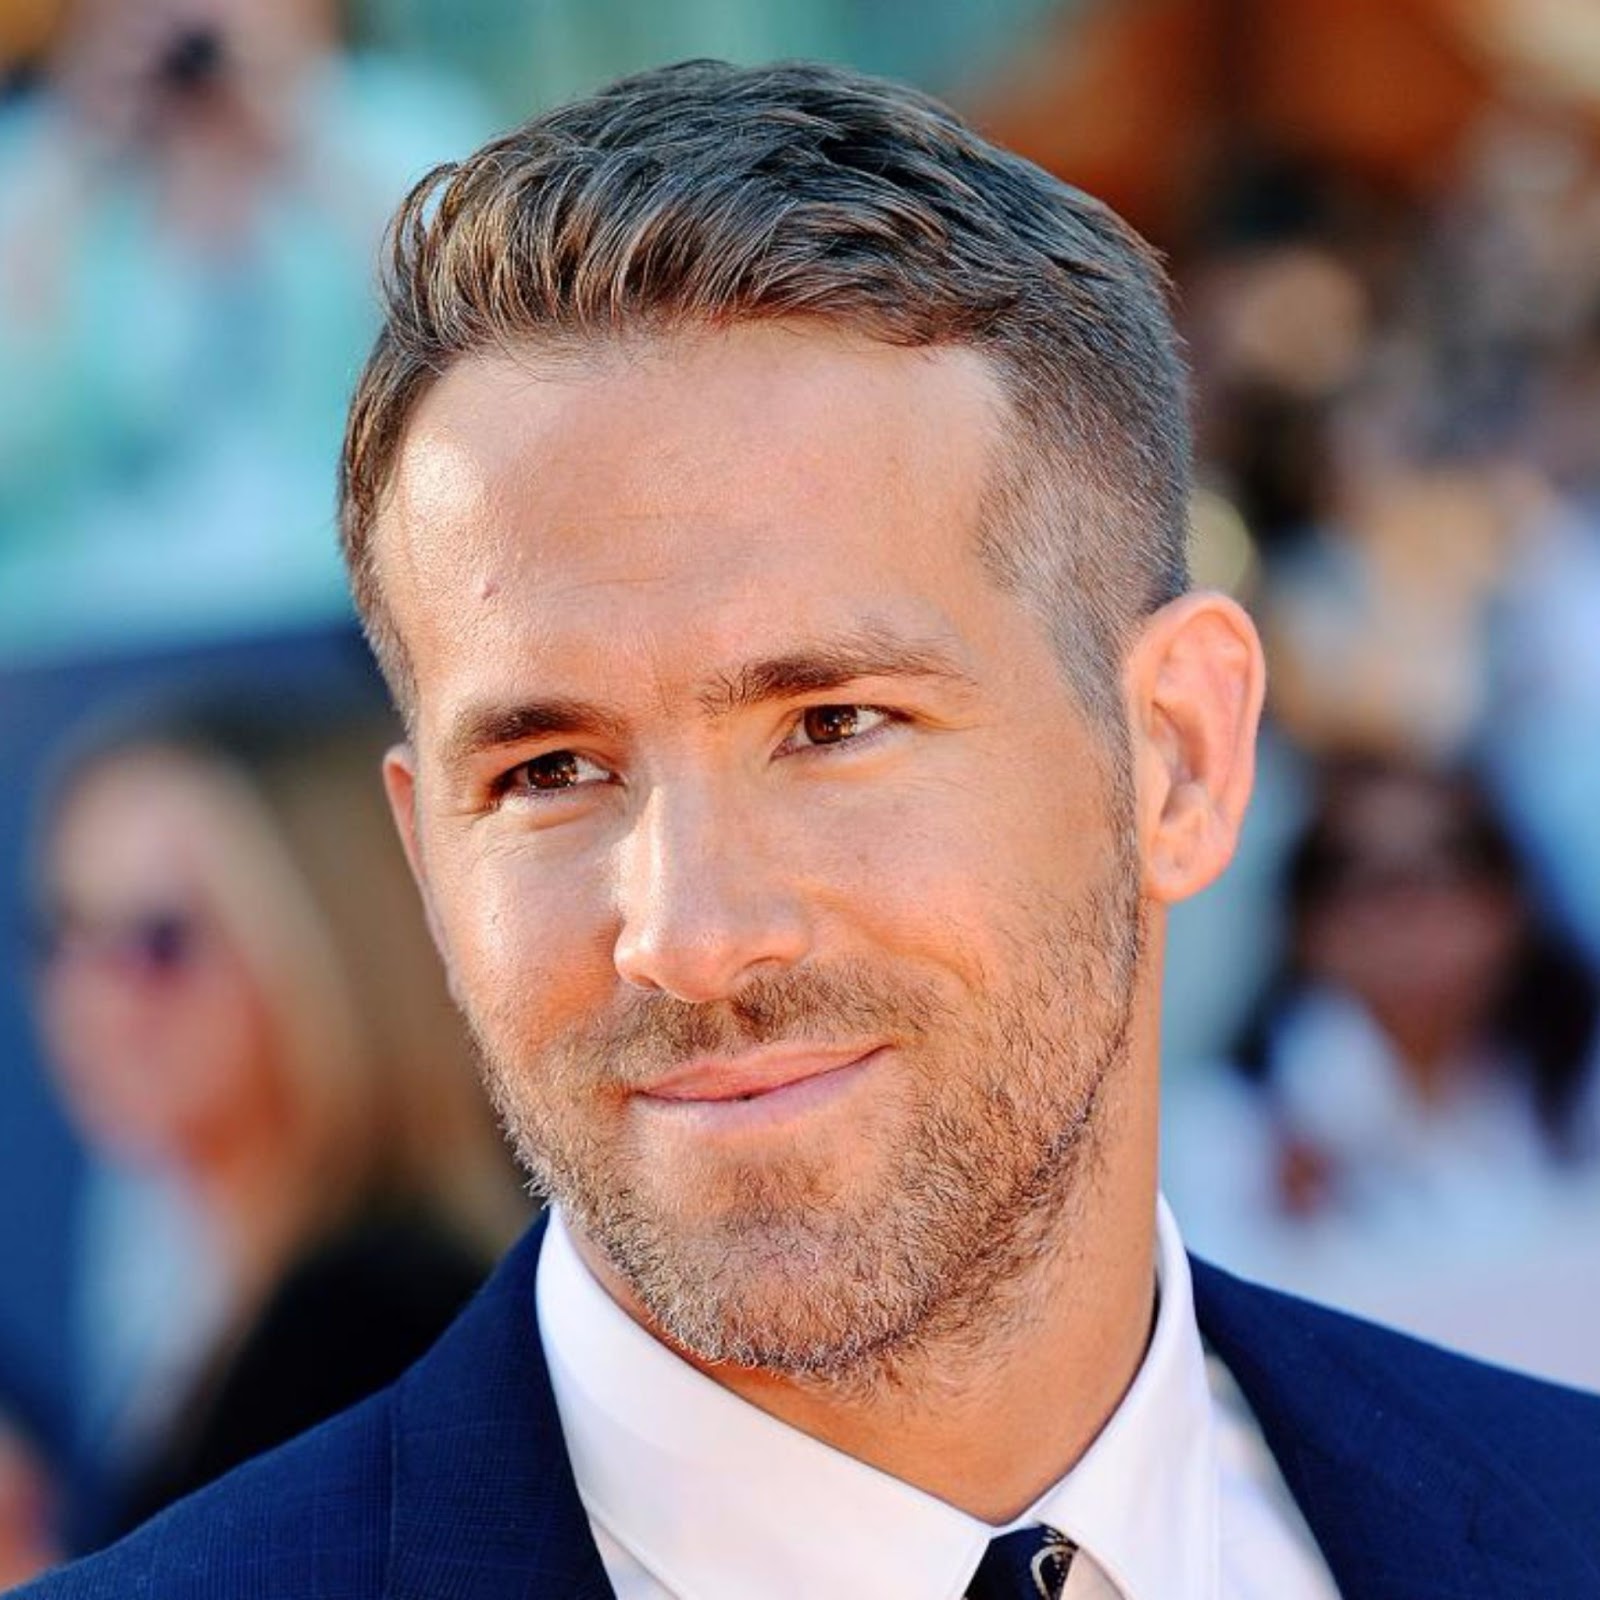 Canadian actor Ryan Reynolds received a star on Hollywood’s Walk of Fame